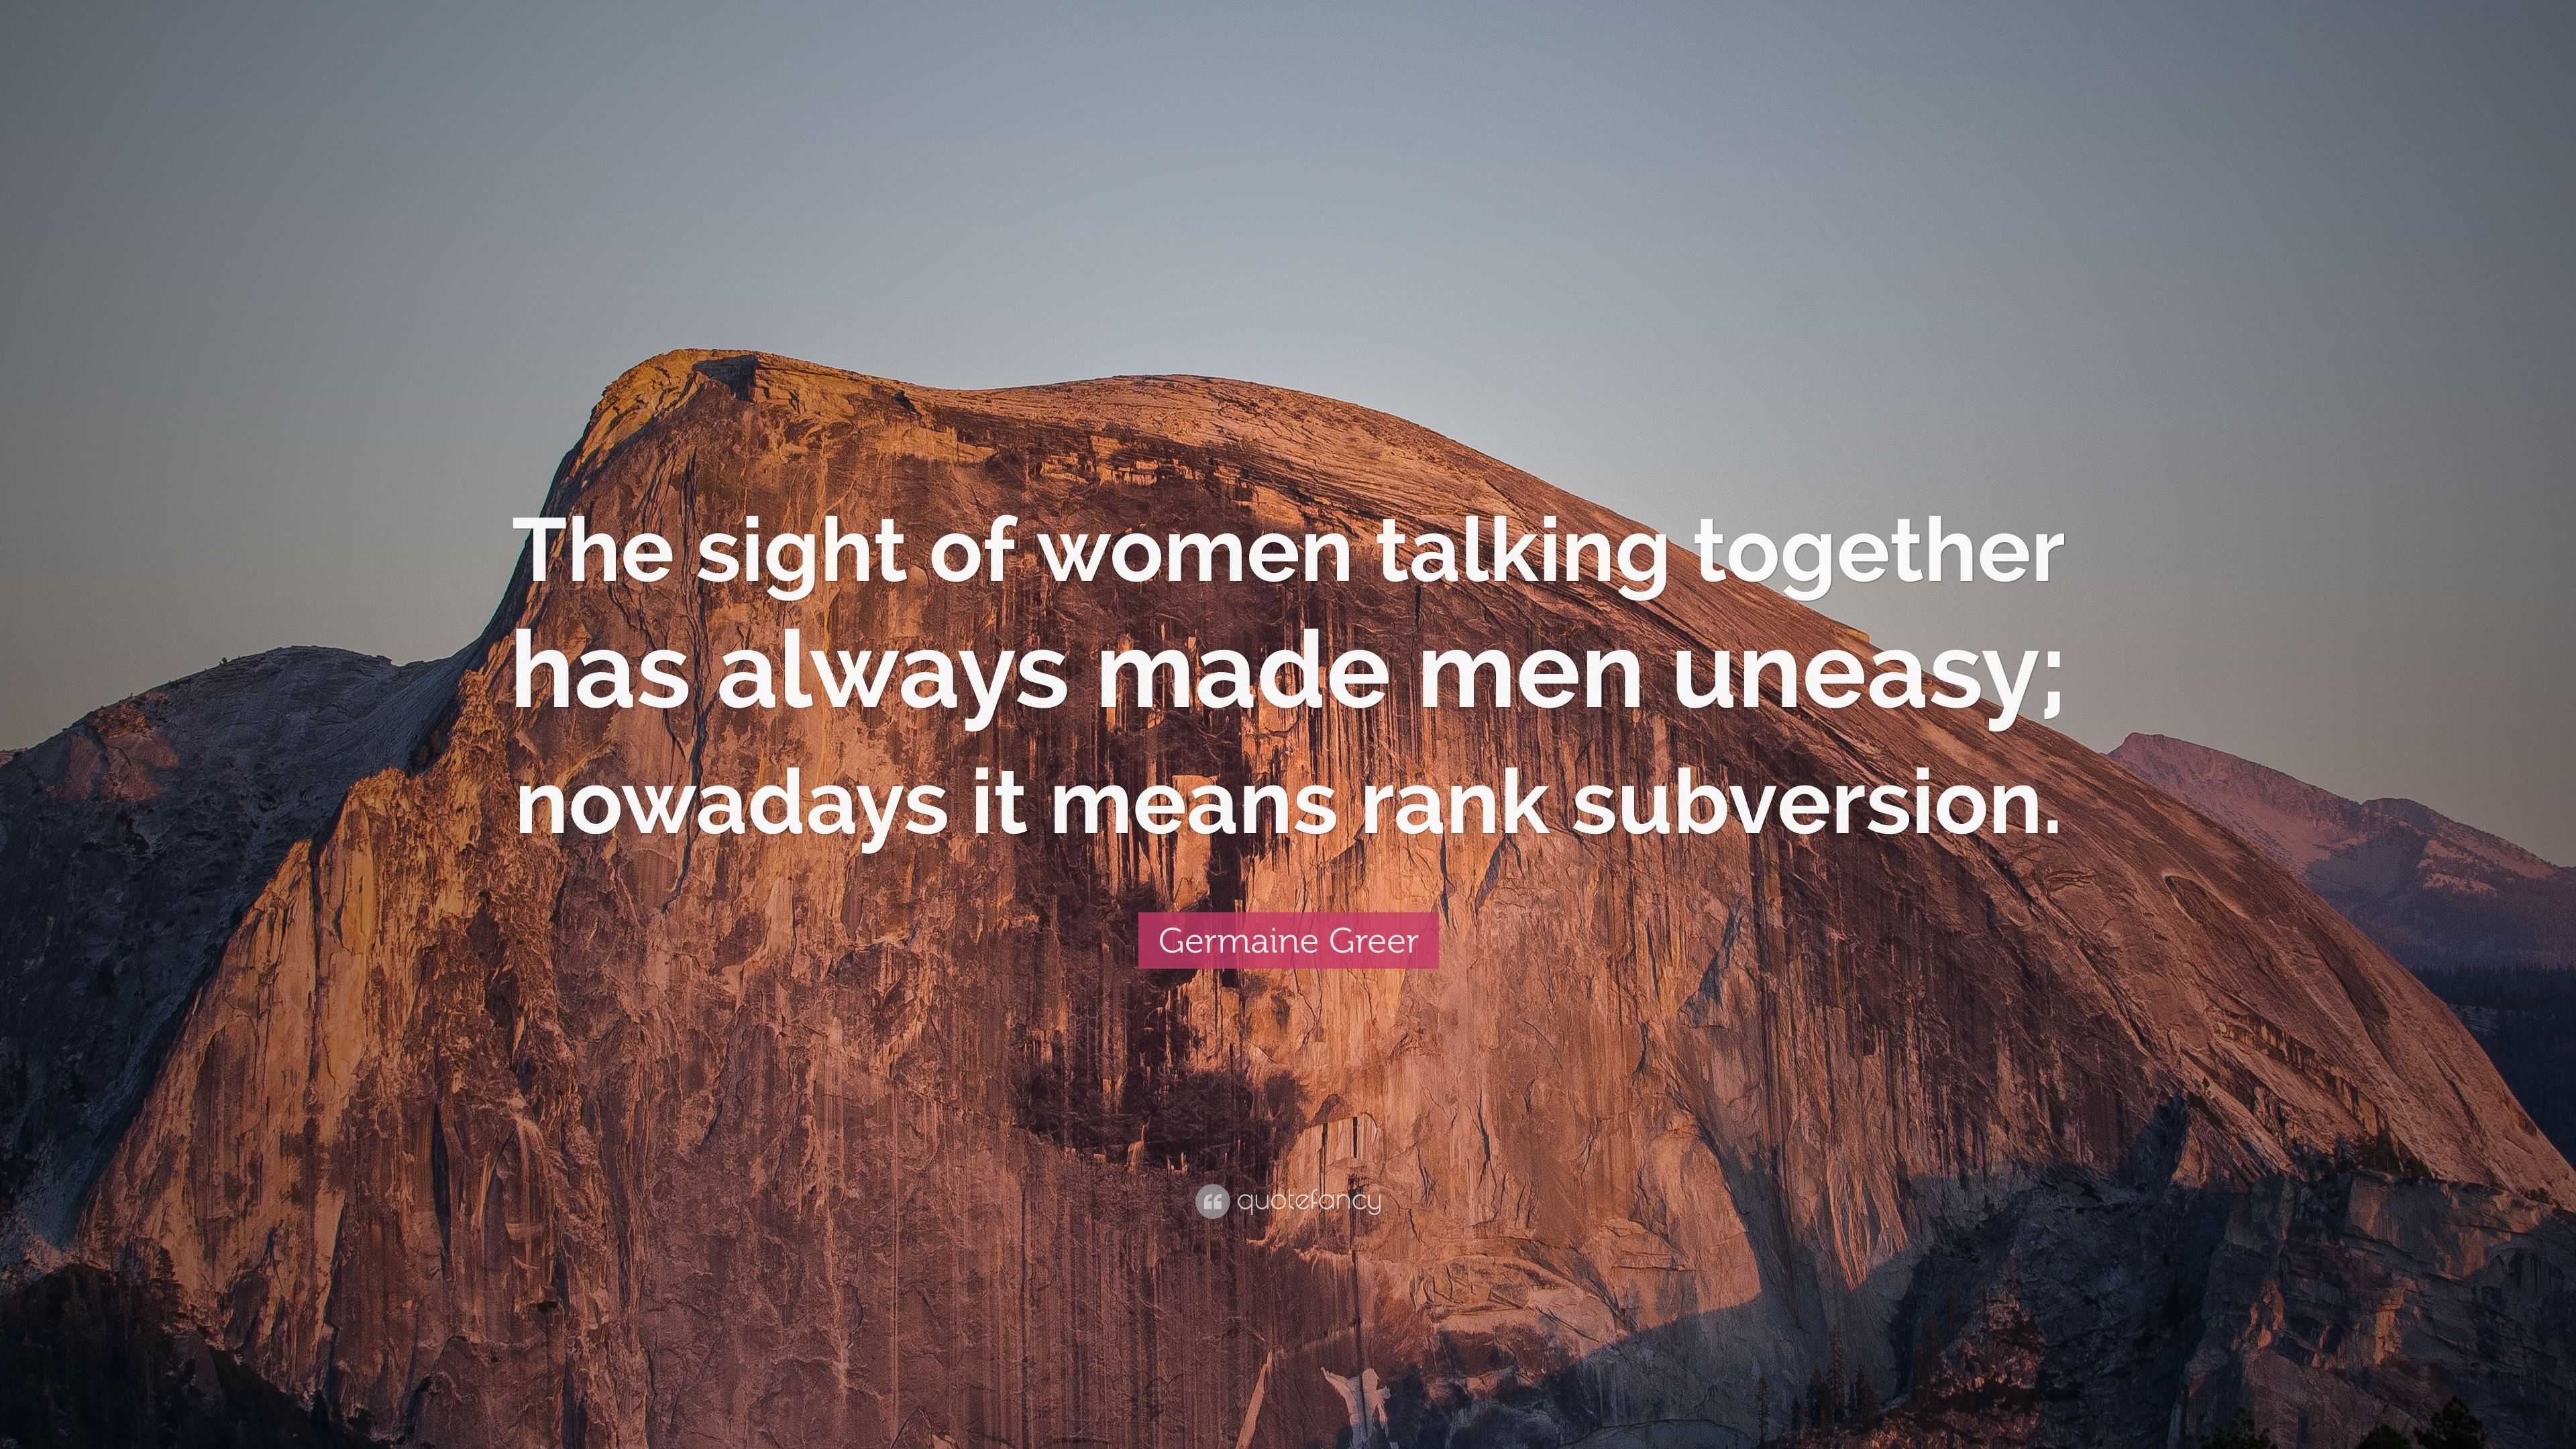 Germaine Greer Quote: “The sight of women talking together has always ...